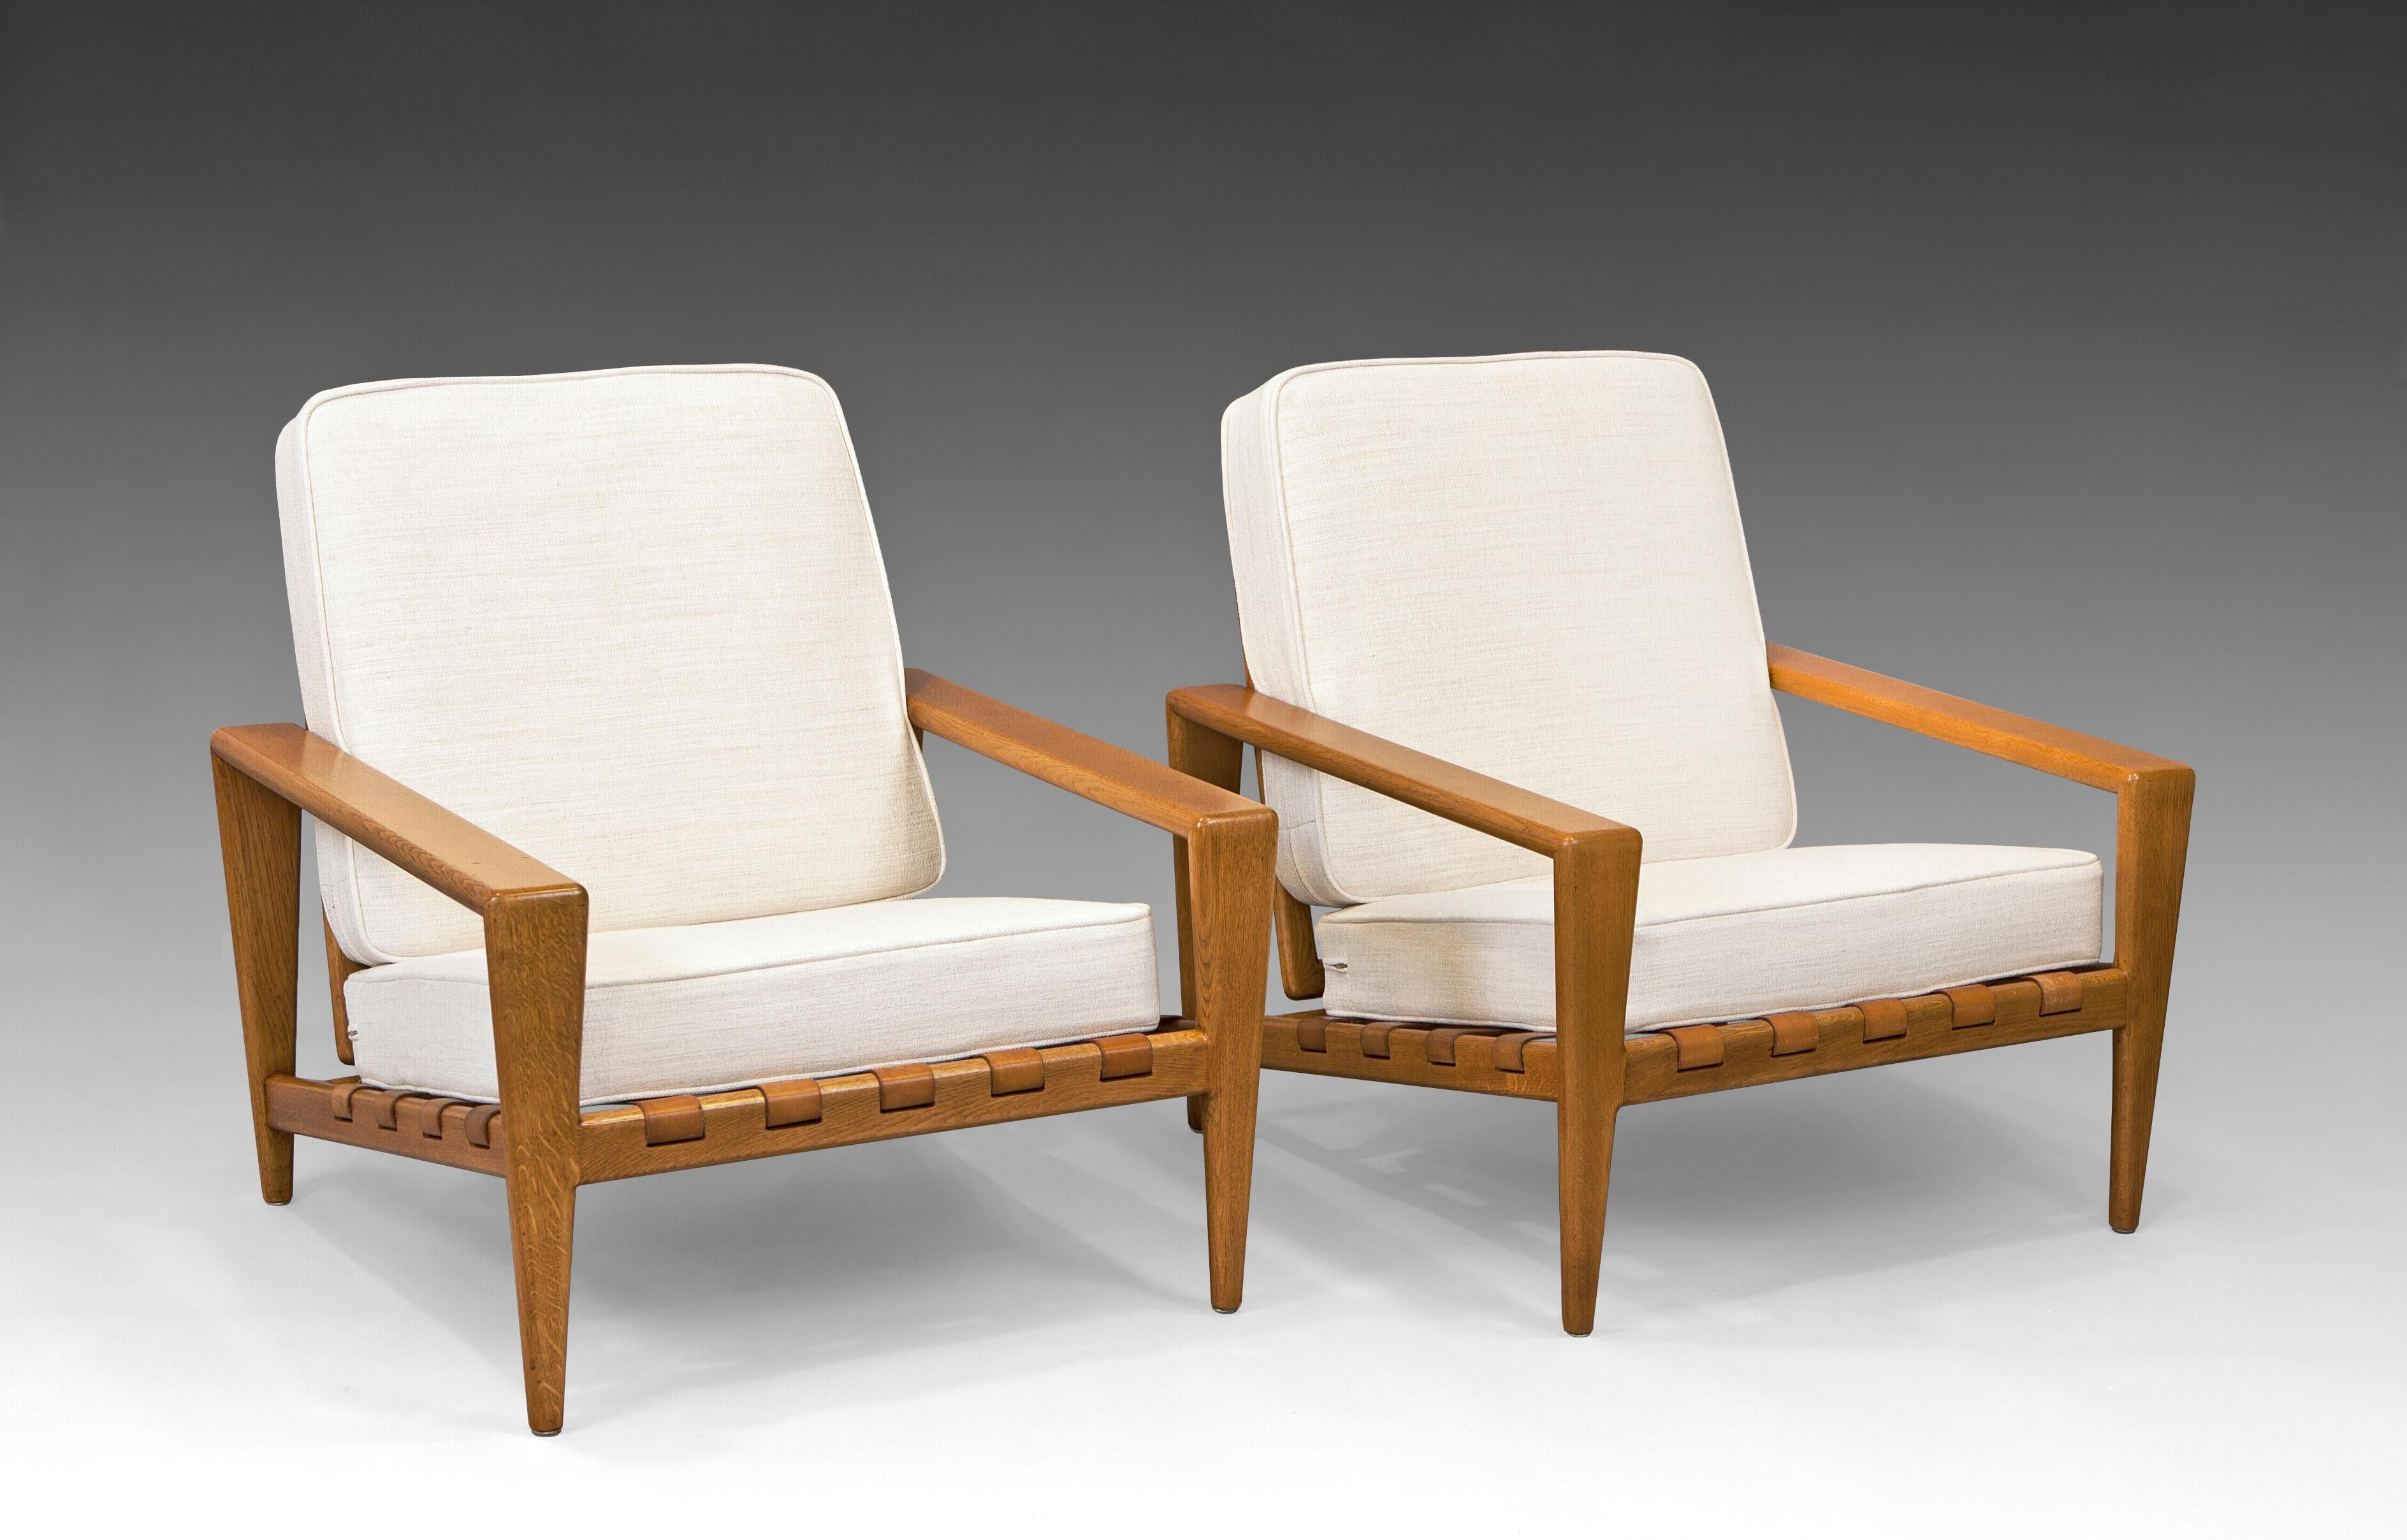 Pair of ‘’Bodö’’ easy chairs in Oak, leather and ulpholstery designed by Svante Skogh for Säffle Möbelfabrik. Sweden, 1950’s. magnificent state, restored and reupholstered. 

Swedish furniture designer Svante Skogh is a Swedish designer best known